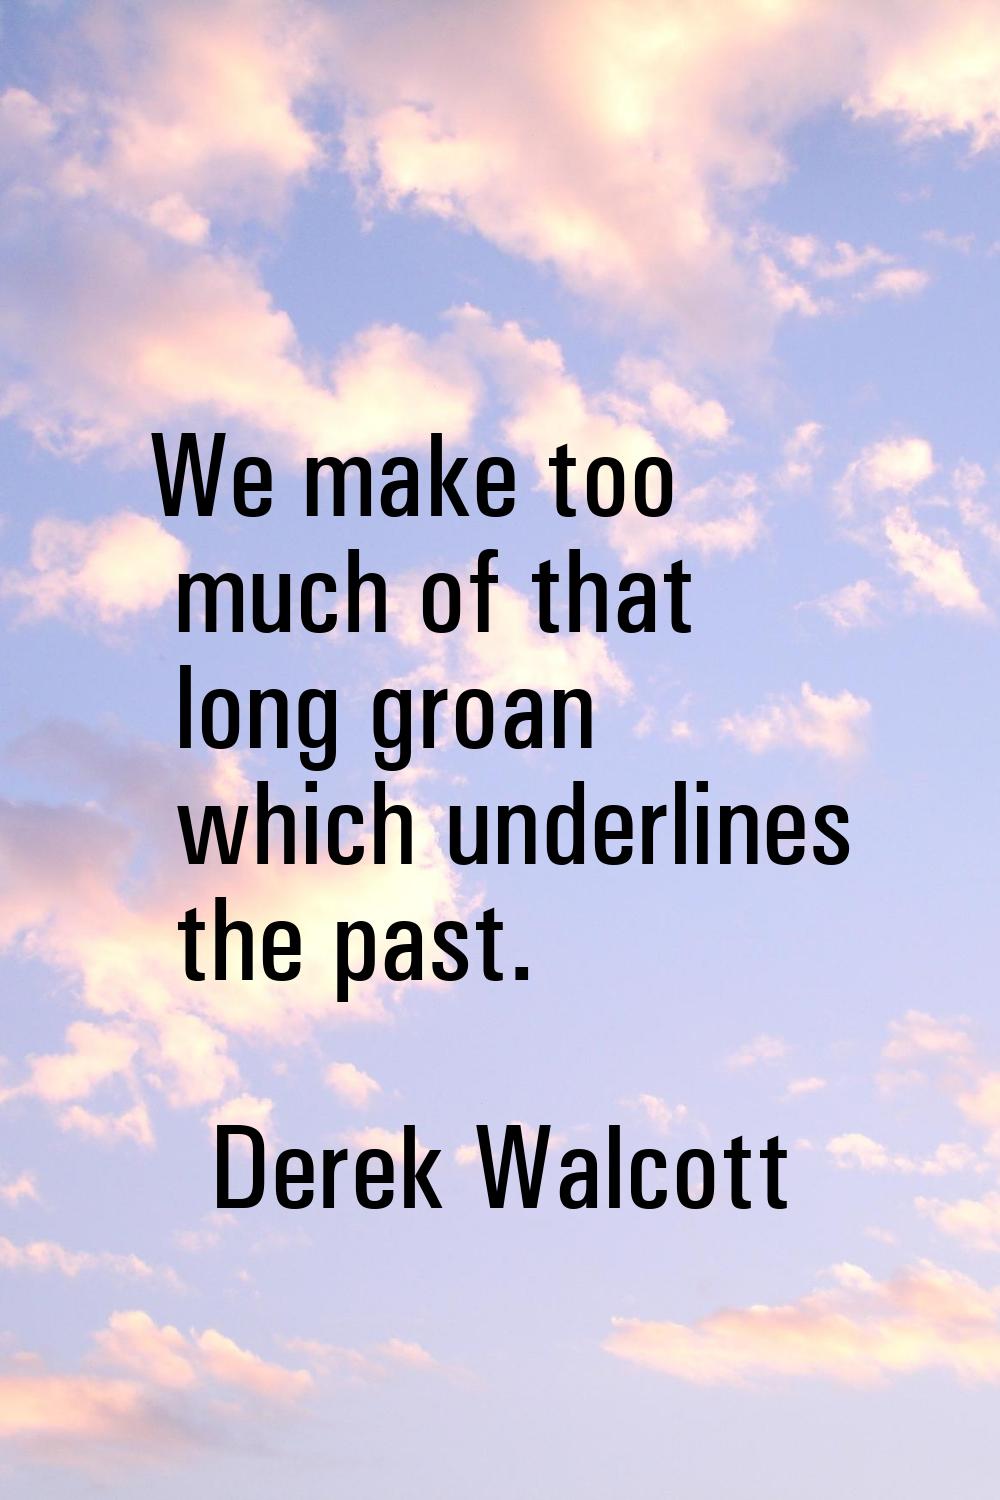 We make too much of that long groan which underlines the past.